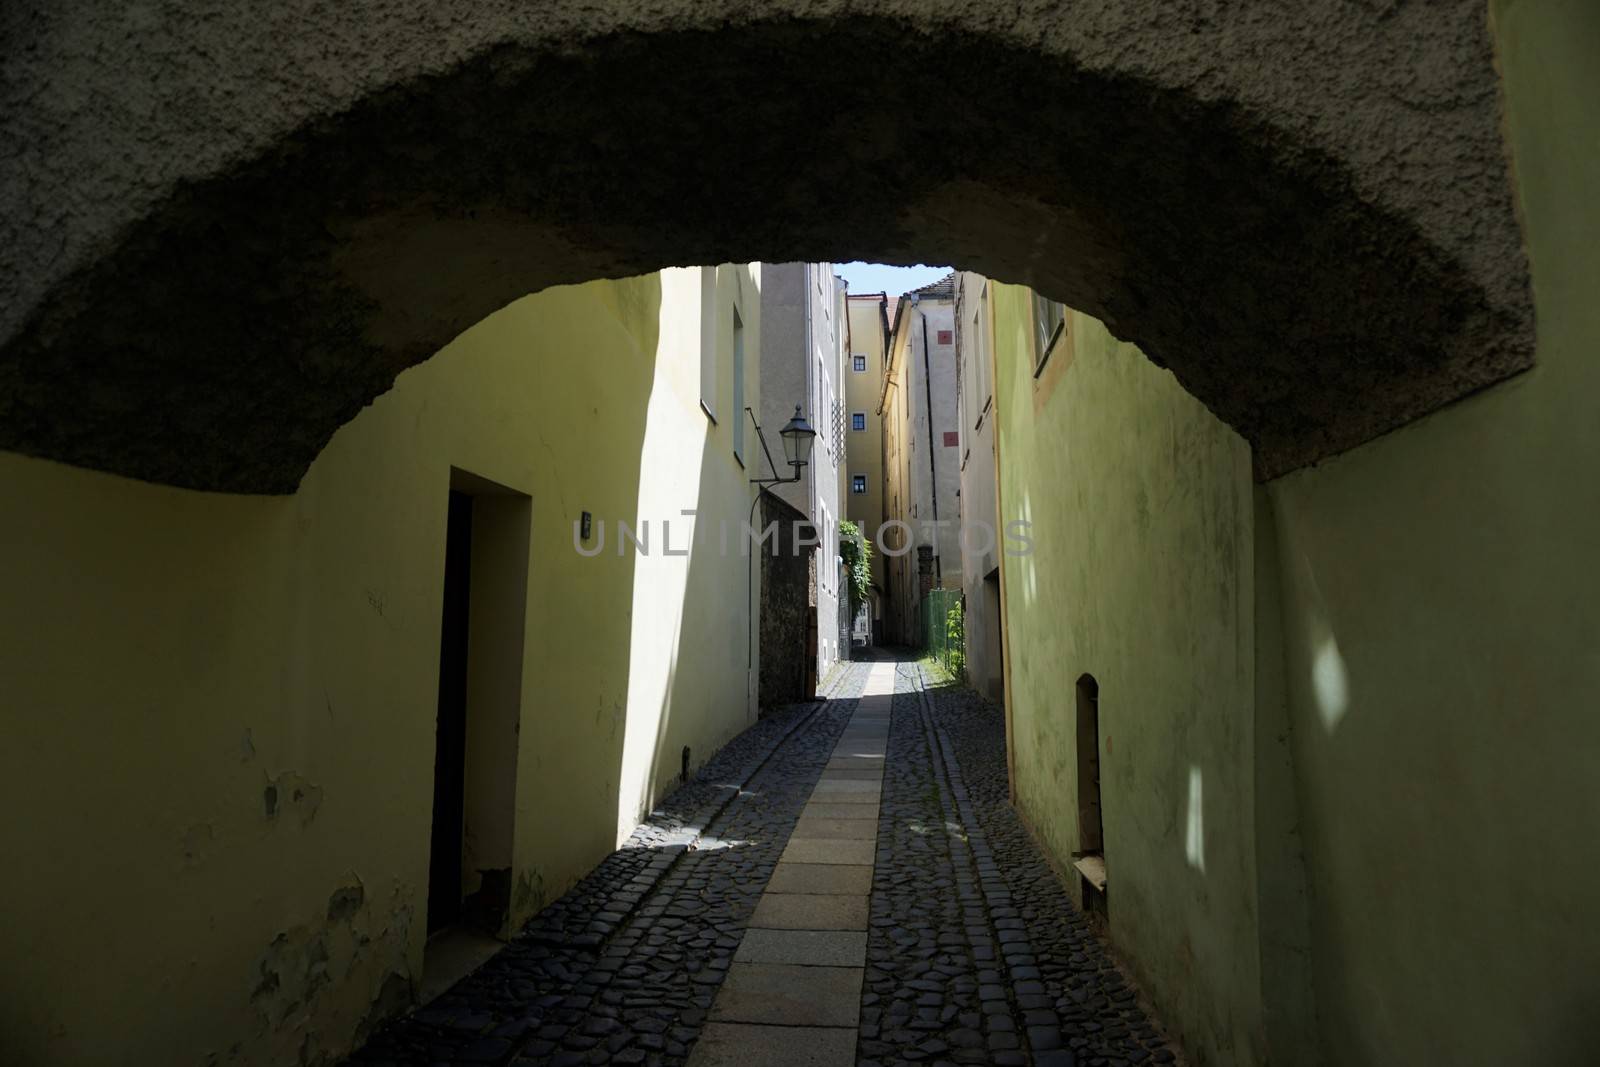 Traitor street in the city center of Goerlitz by pisces2386